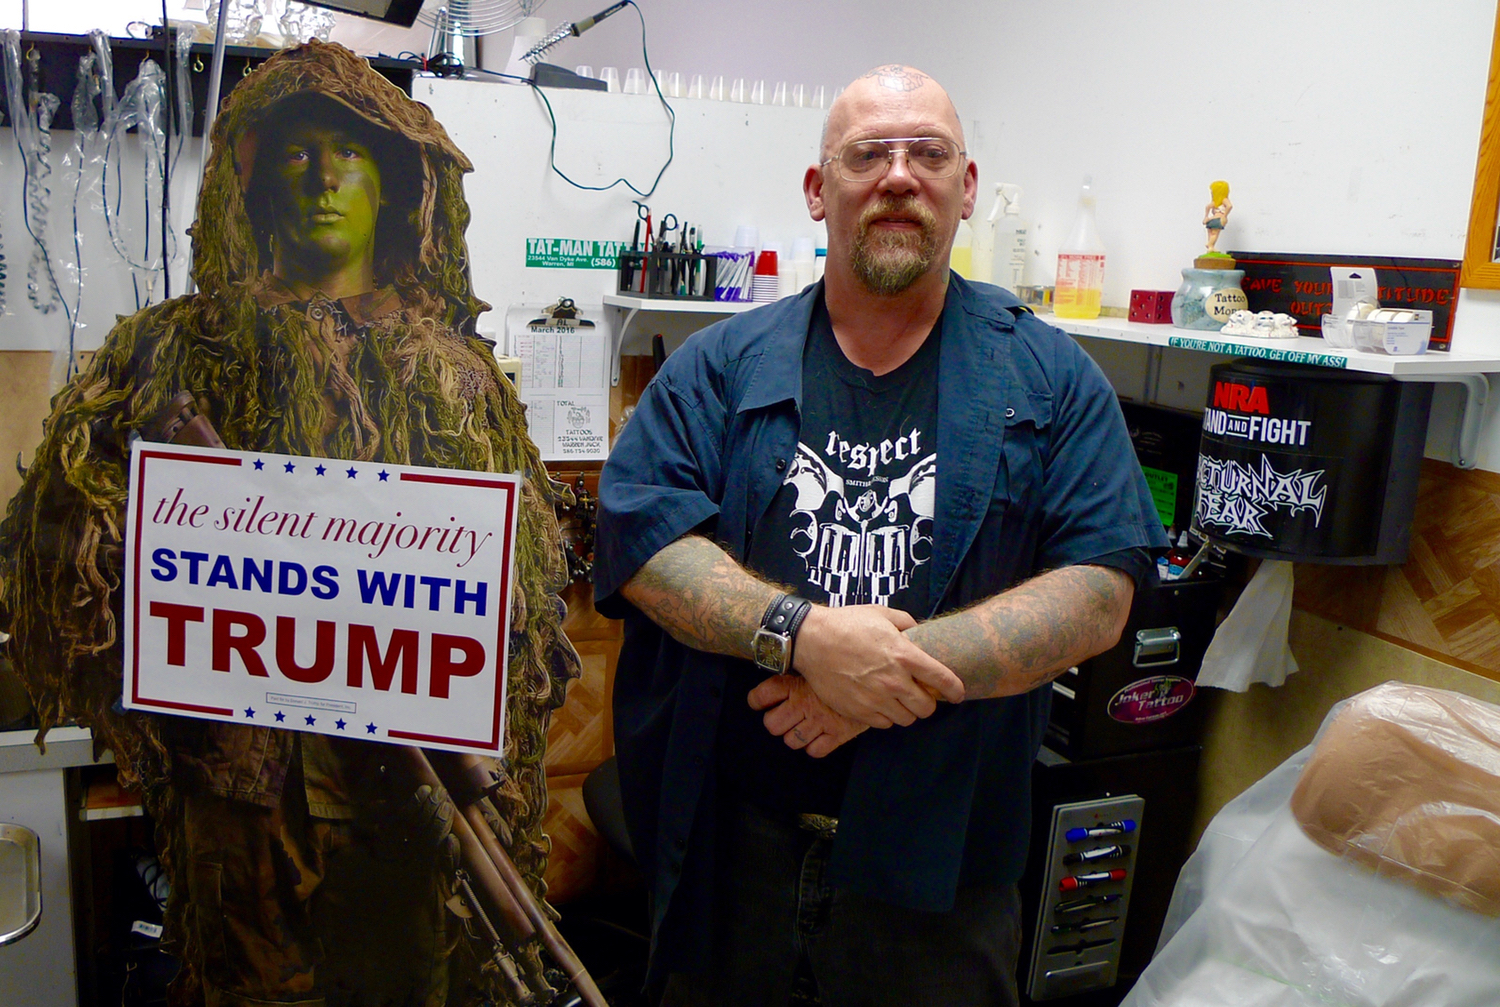 The soldier is cardboard, but Alvin Carden thinks it looks like his nephew, and as a military veteran himself, he likes the message it sends with his Trump rally sign, so he keeps it in his tattoo shop in Warren. (Bridge photo by Nancy Derringer)